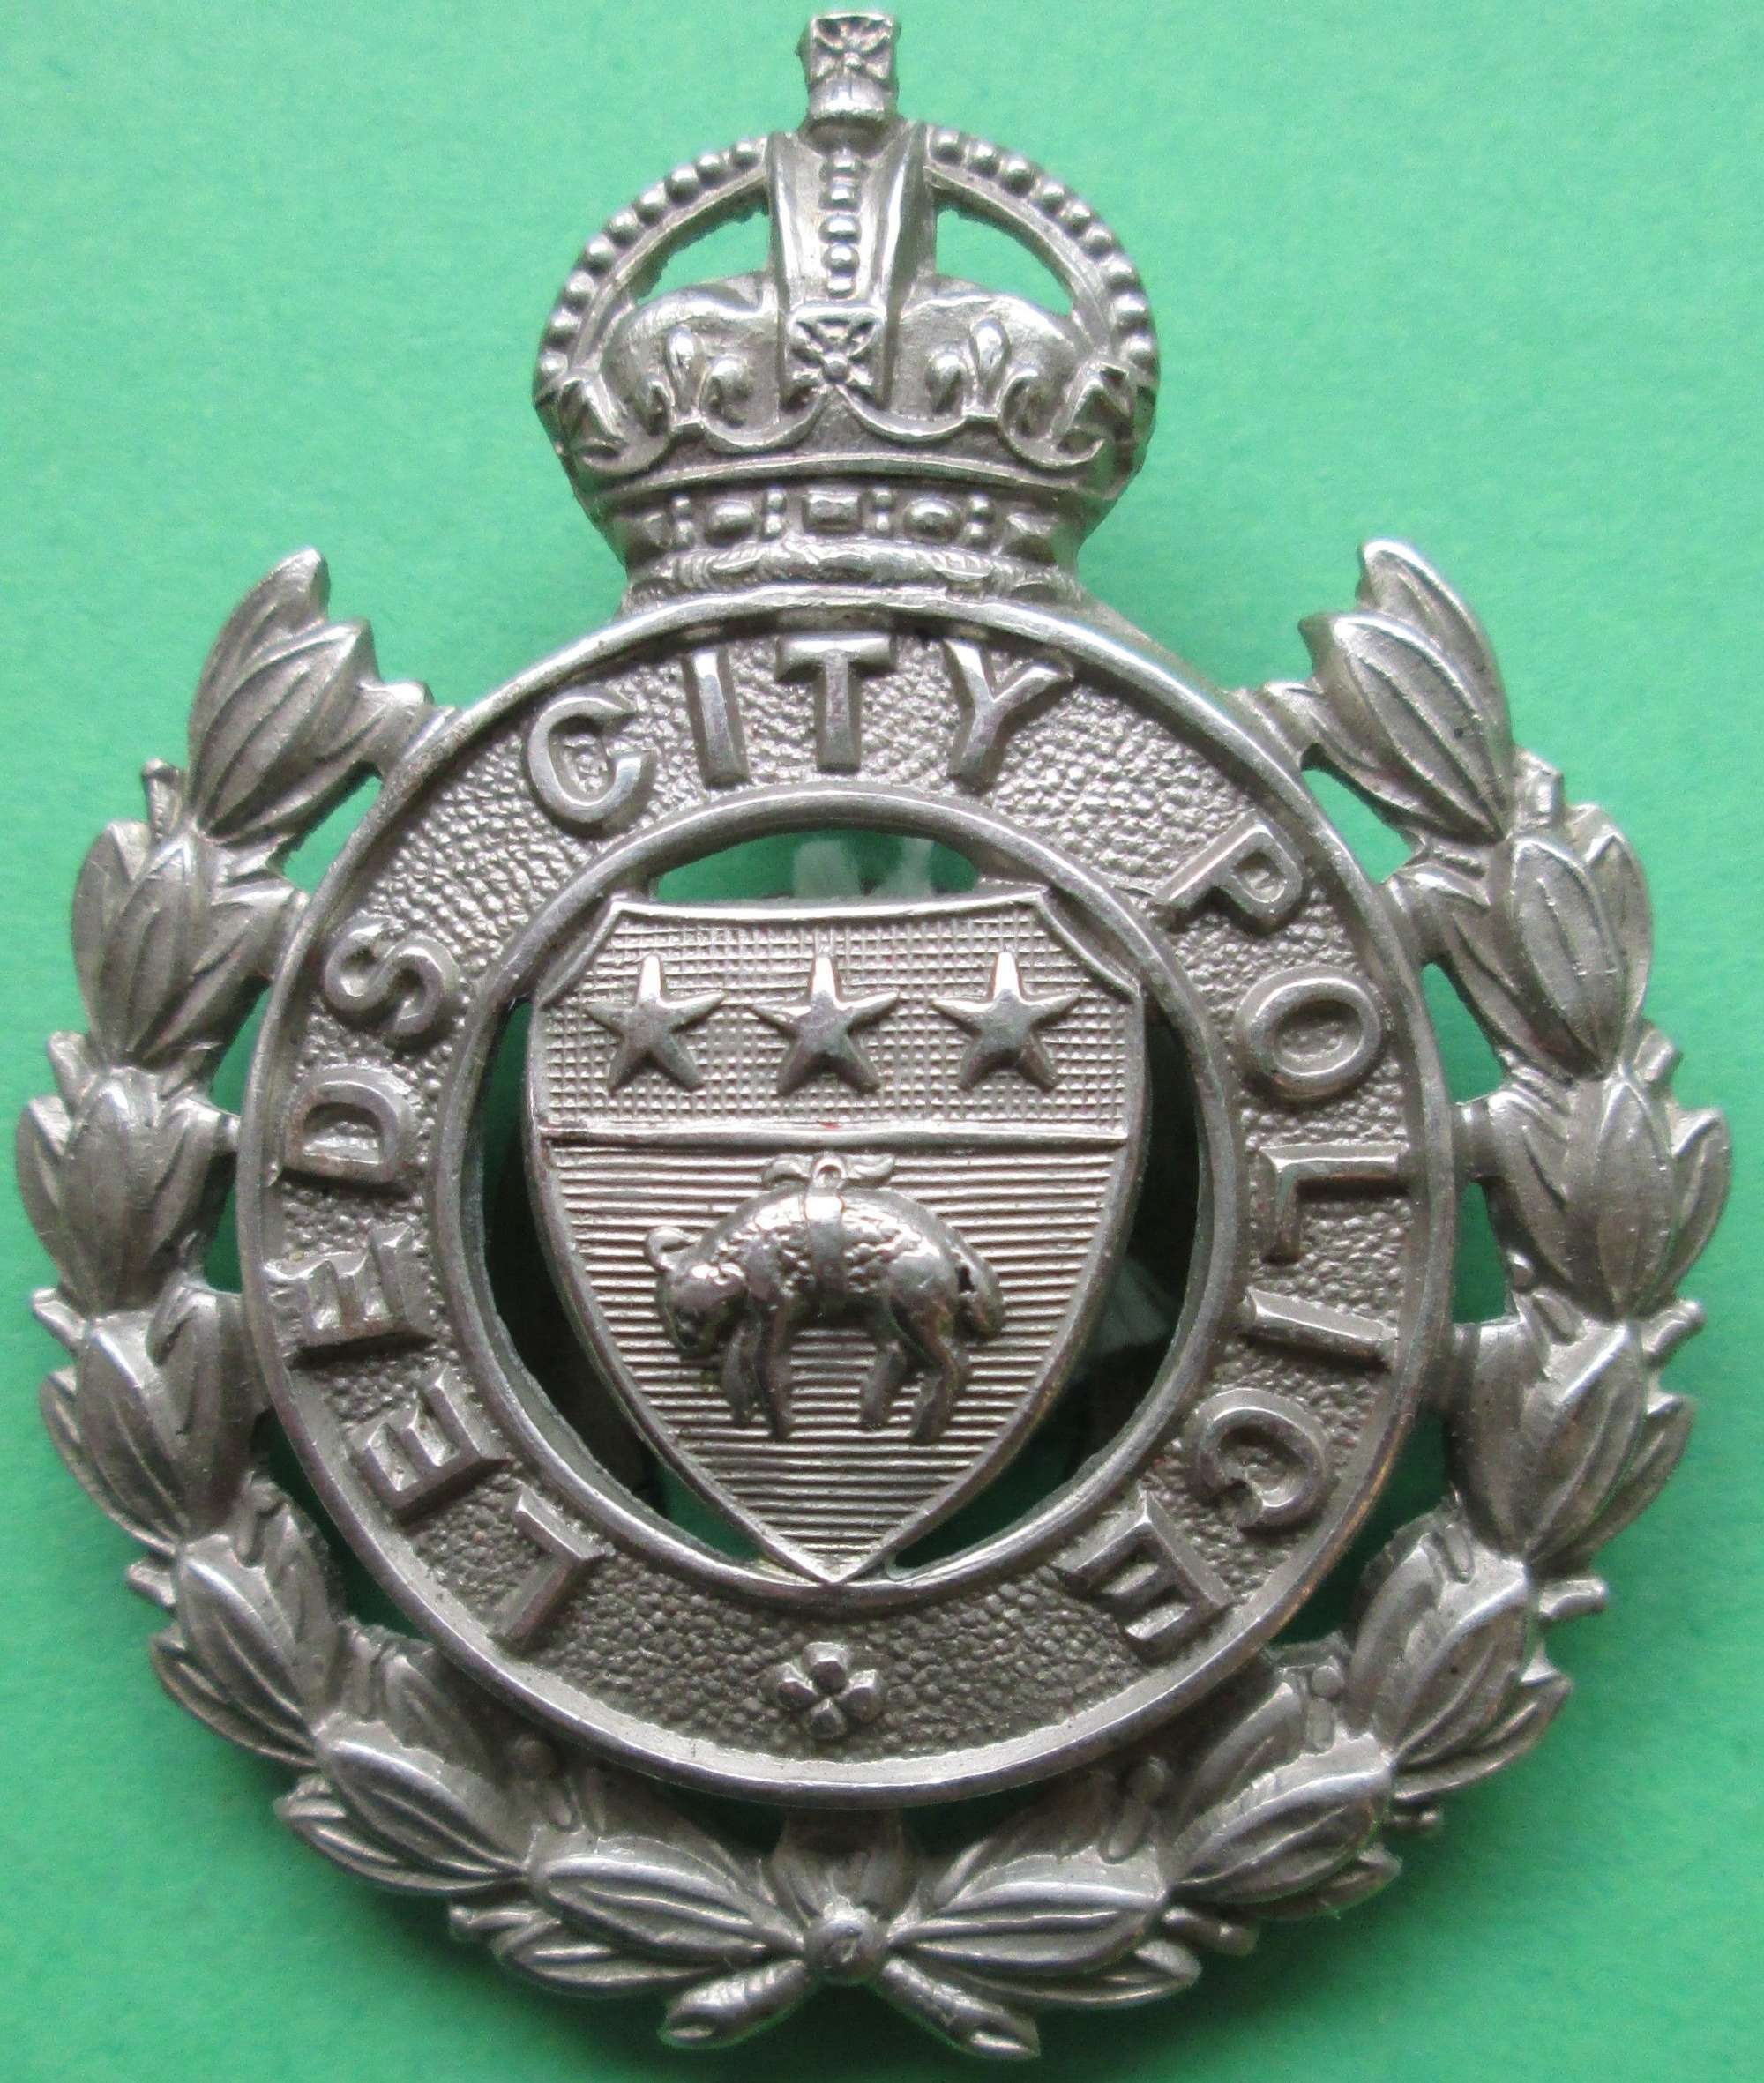 A LEEDS CITY POLICE LAPEL BADGE NUMBERED 24 TO THE FIXING